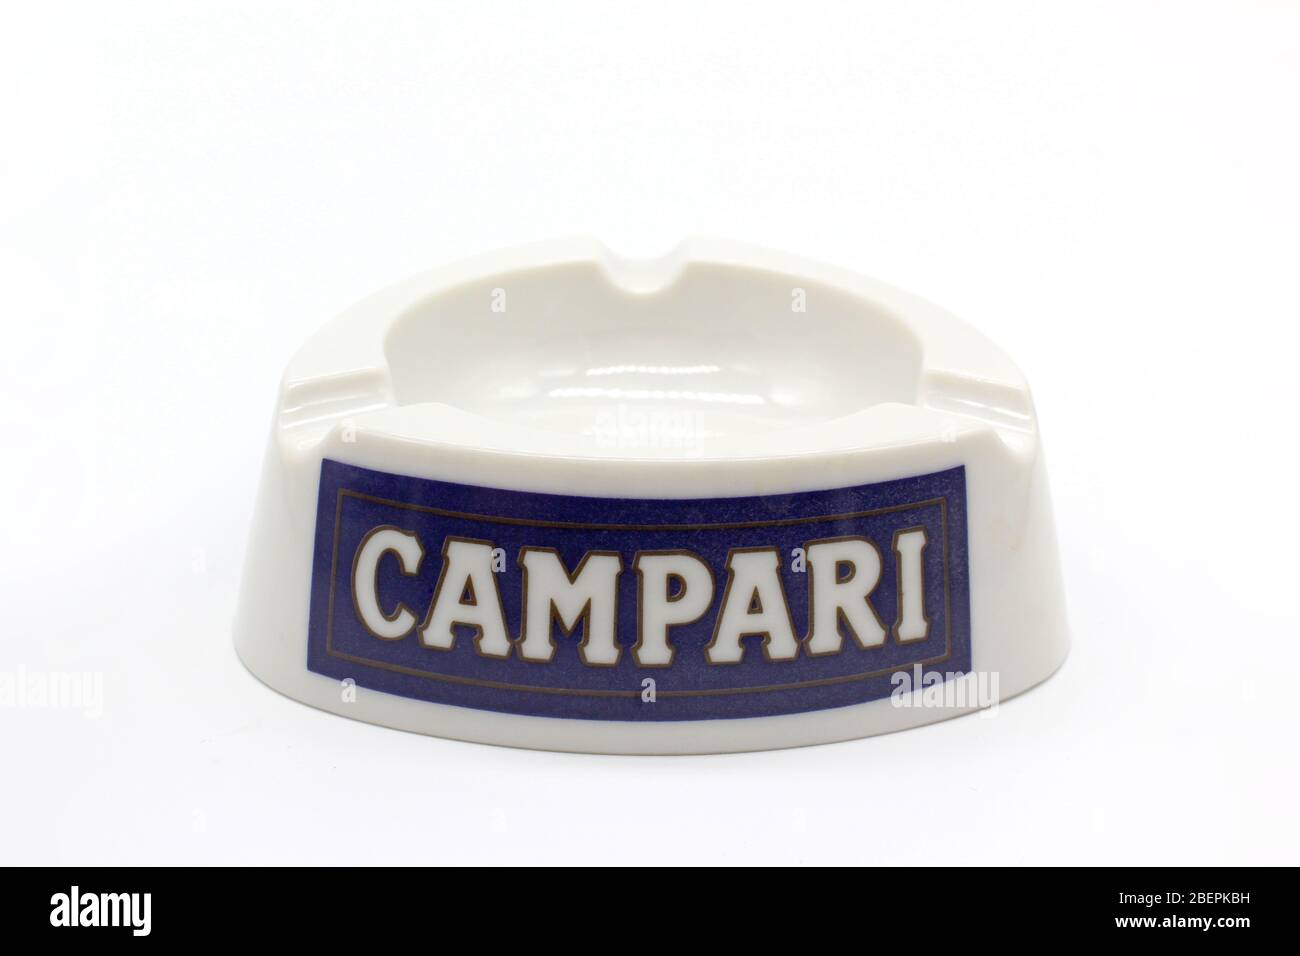 Vintage ashtray with logo of Campari, isolated on a white background, close up Stock Photo